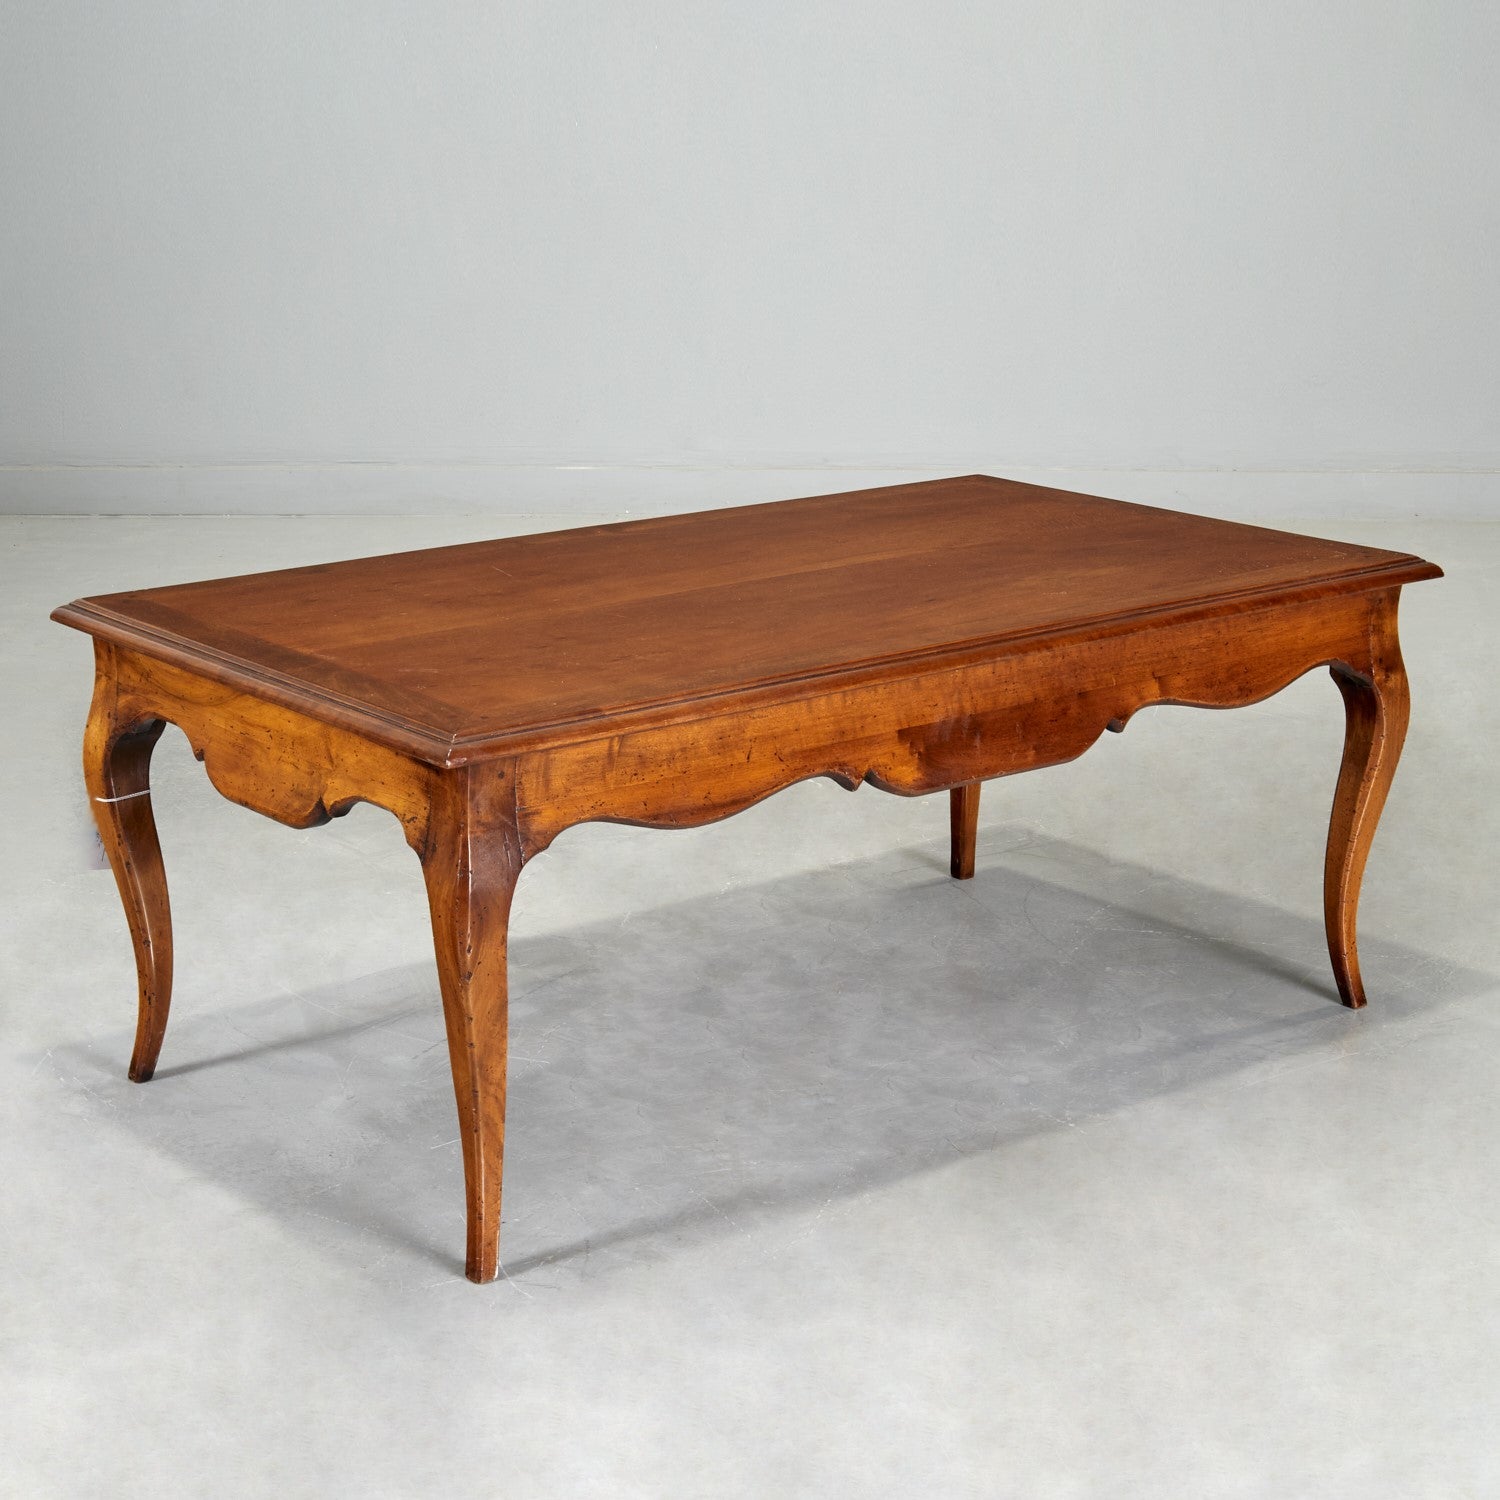 Mid 20th c., French Provincial cherry coffee table with shaped apron, on cabriole legs, stamped 